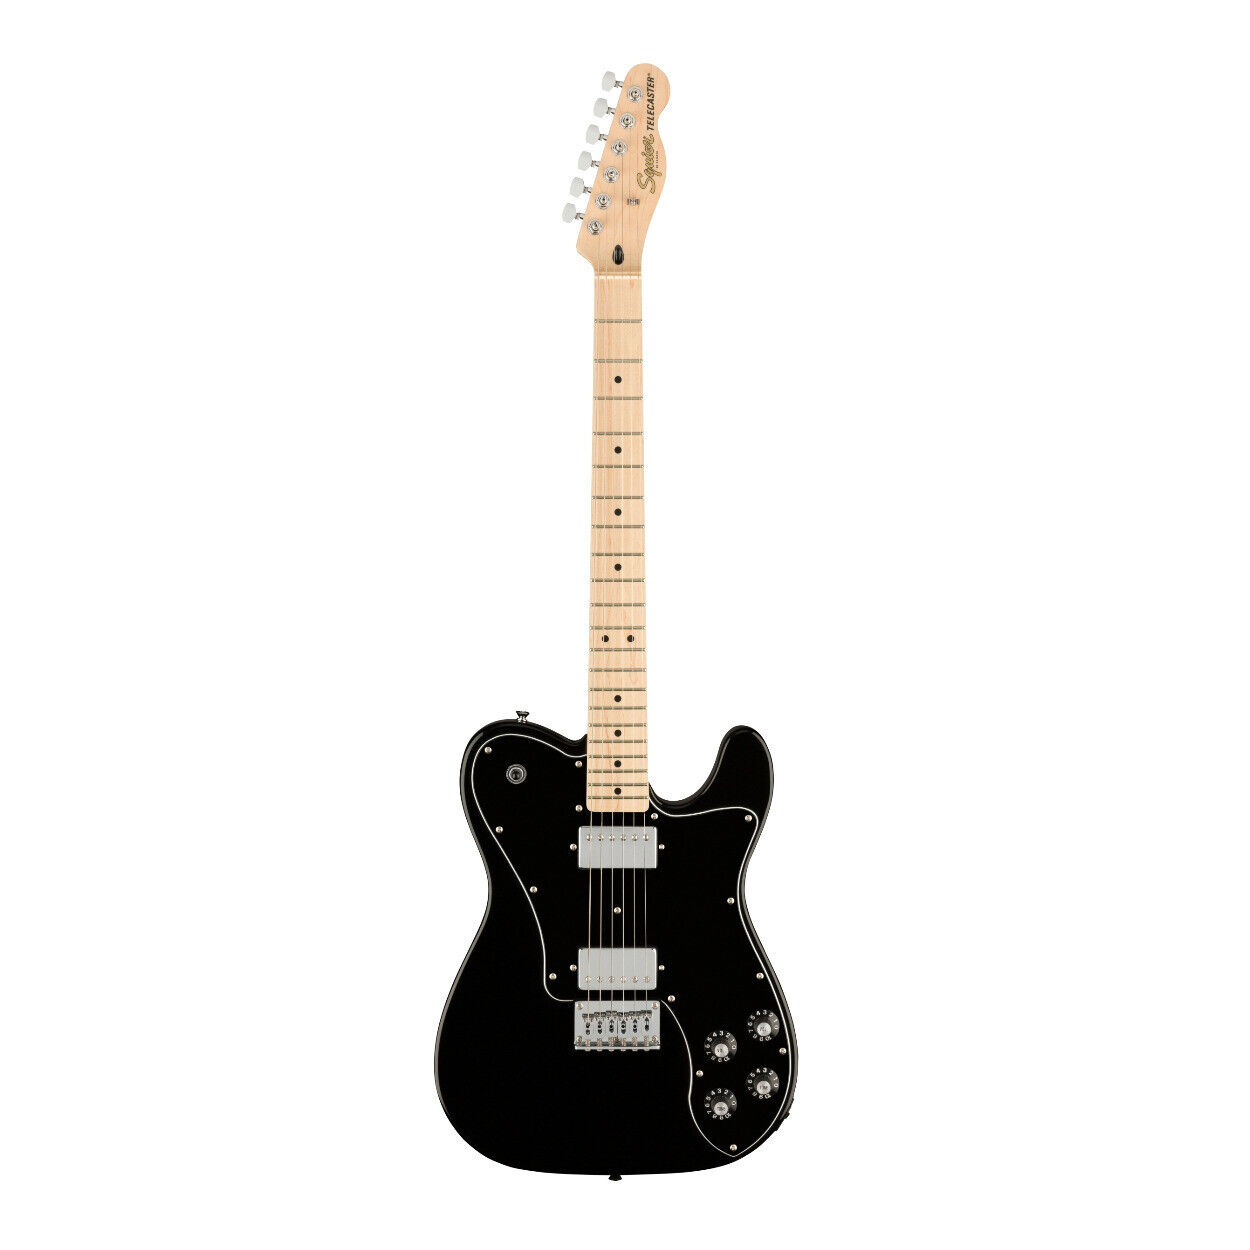 Fender Affinity Series Telecaster Deluxe 6 String Electric Guitar Black